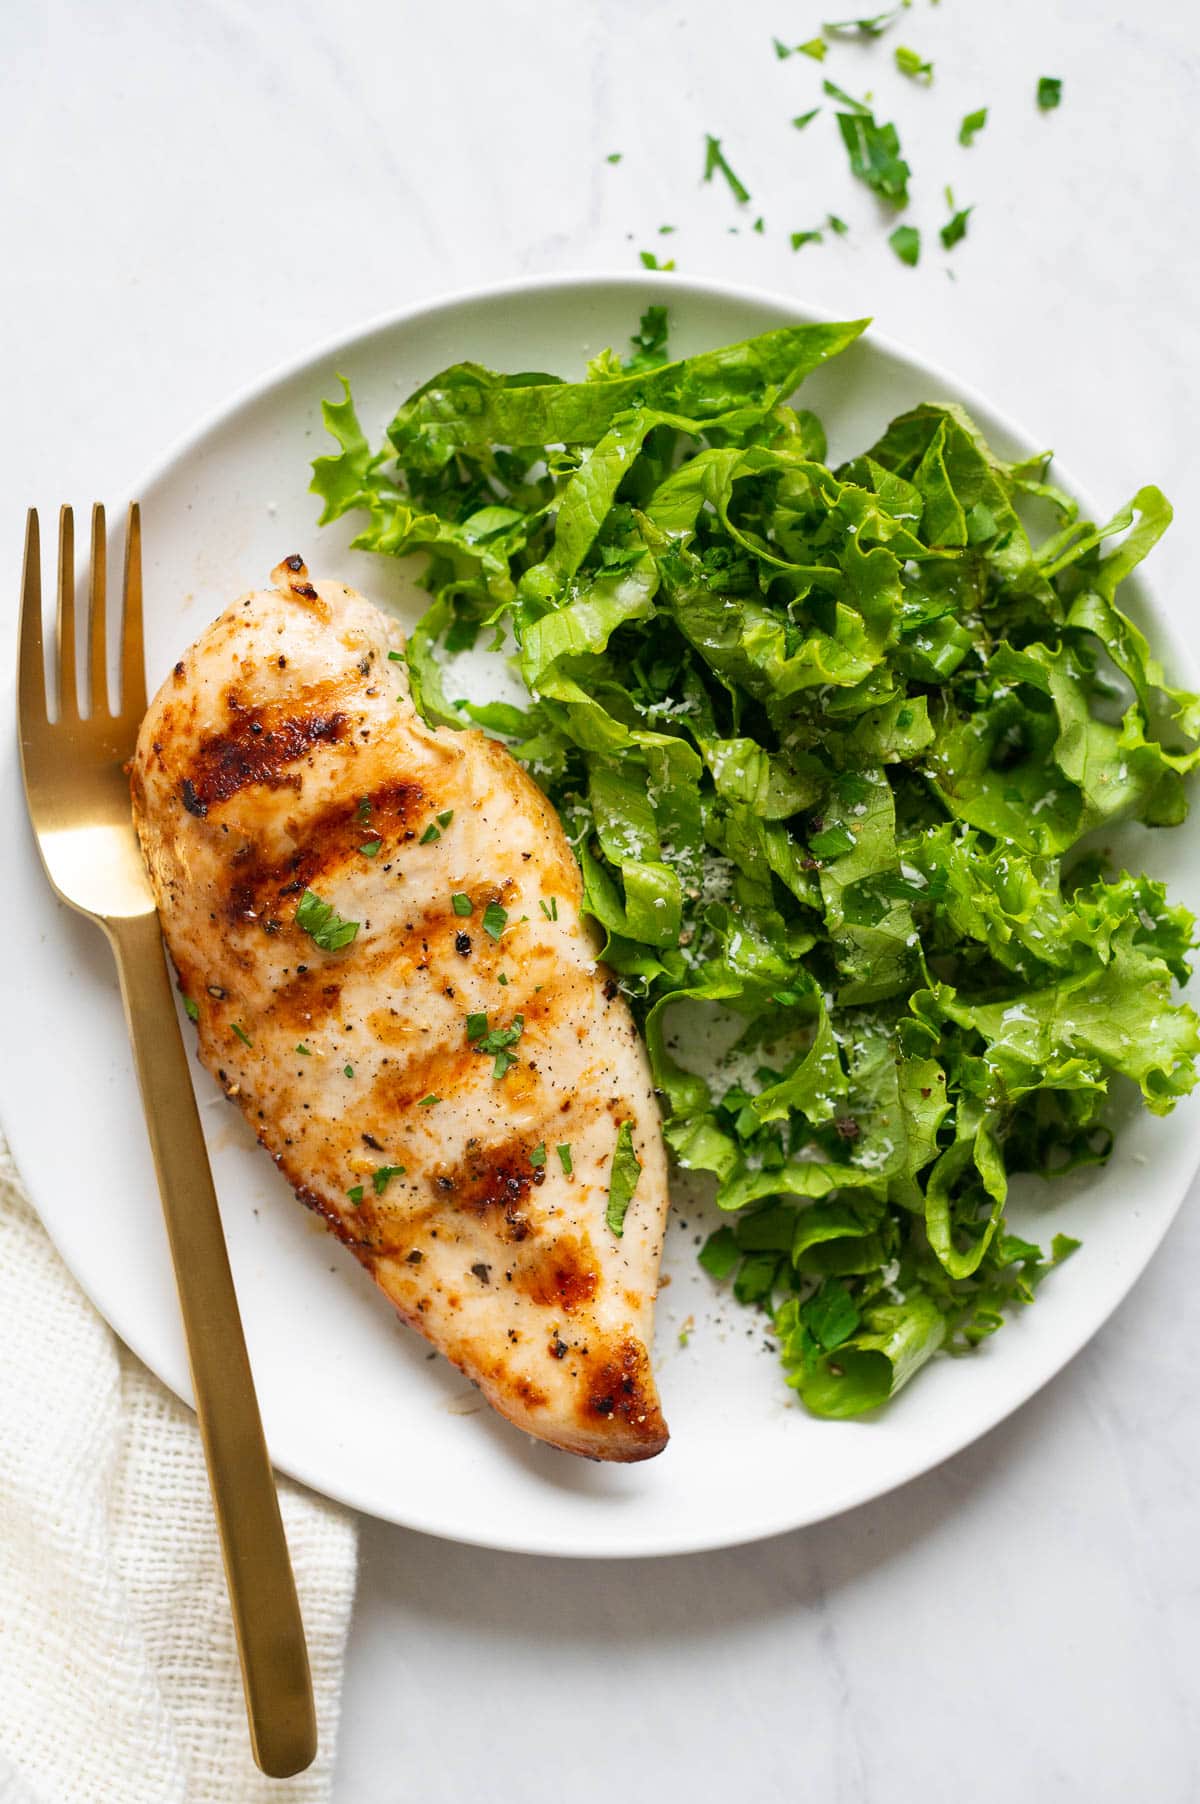 Grilled chicken breast served with lettuce salad on a plate with a fork.